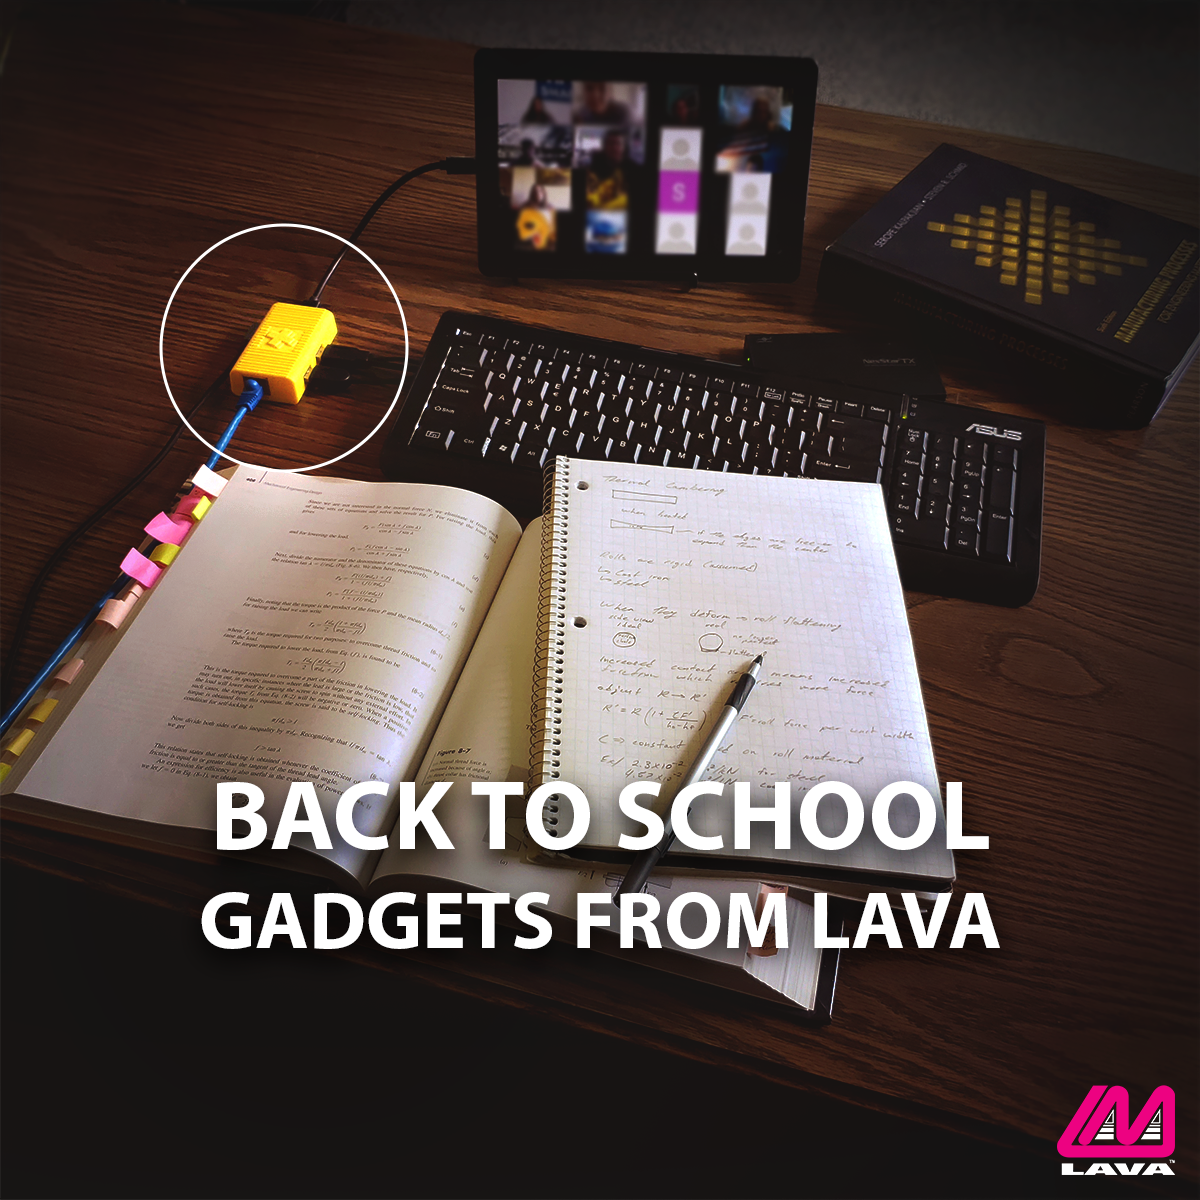 Back to School gadgets from LAVA